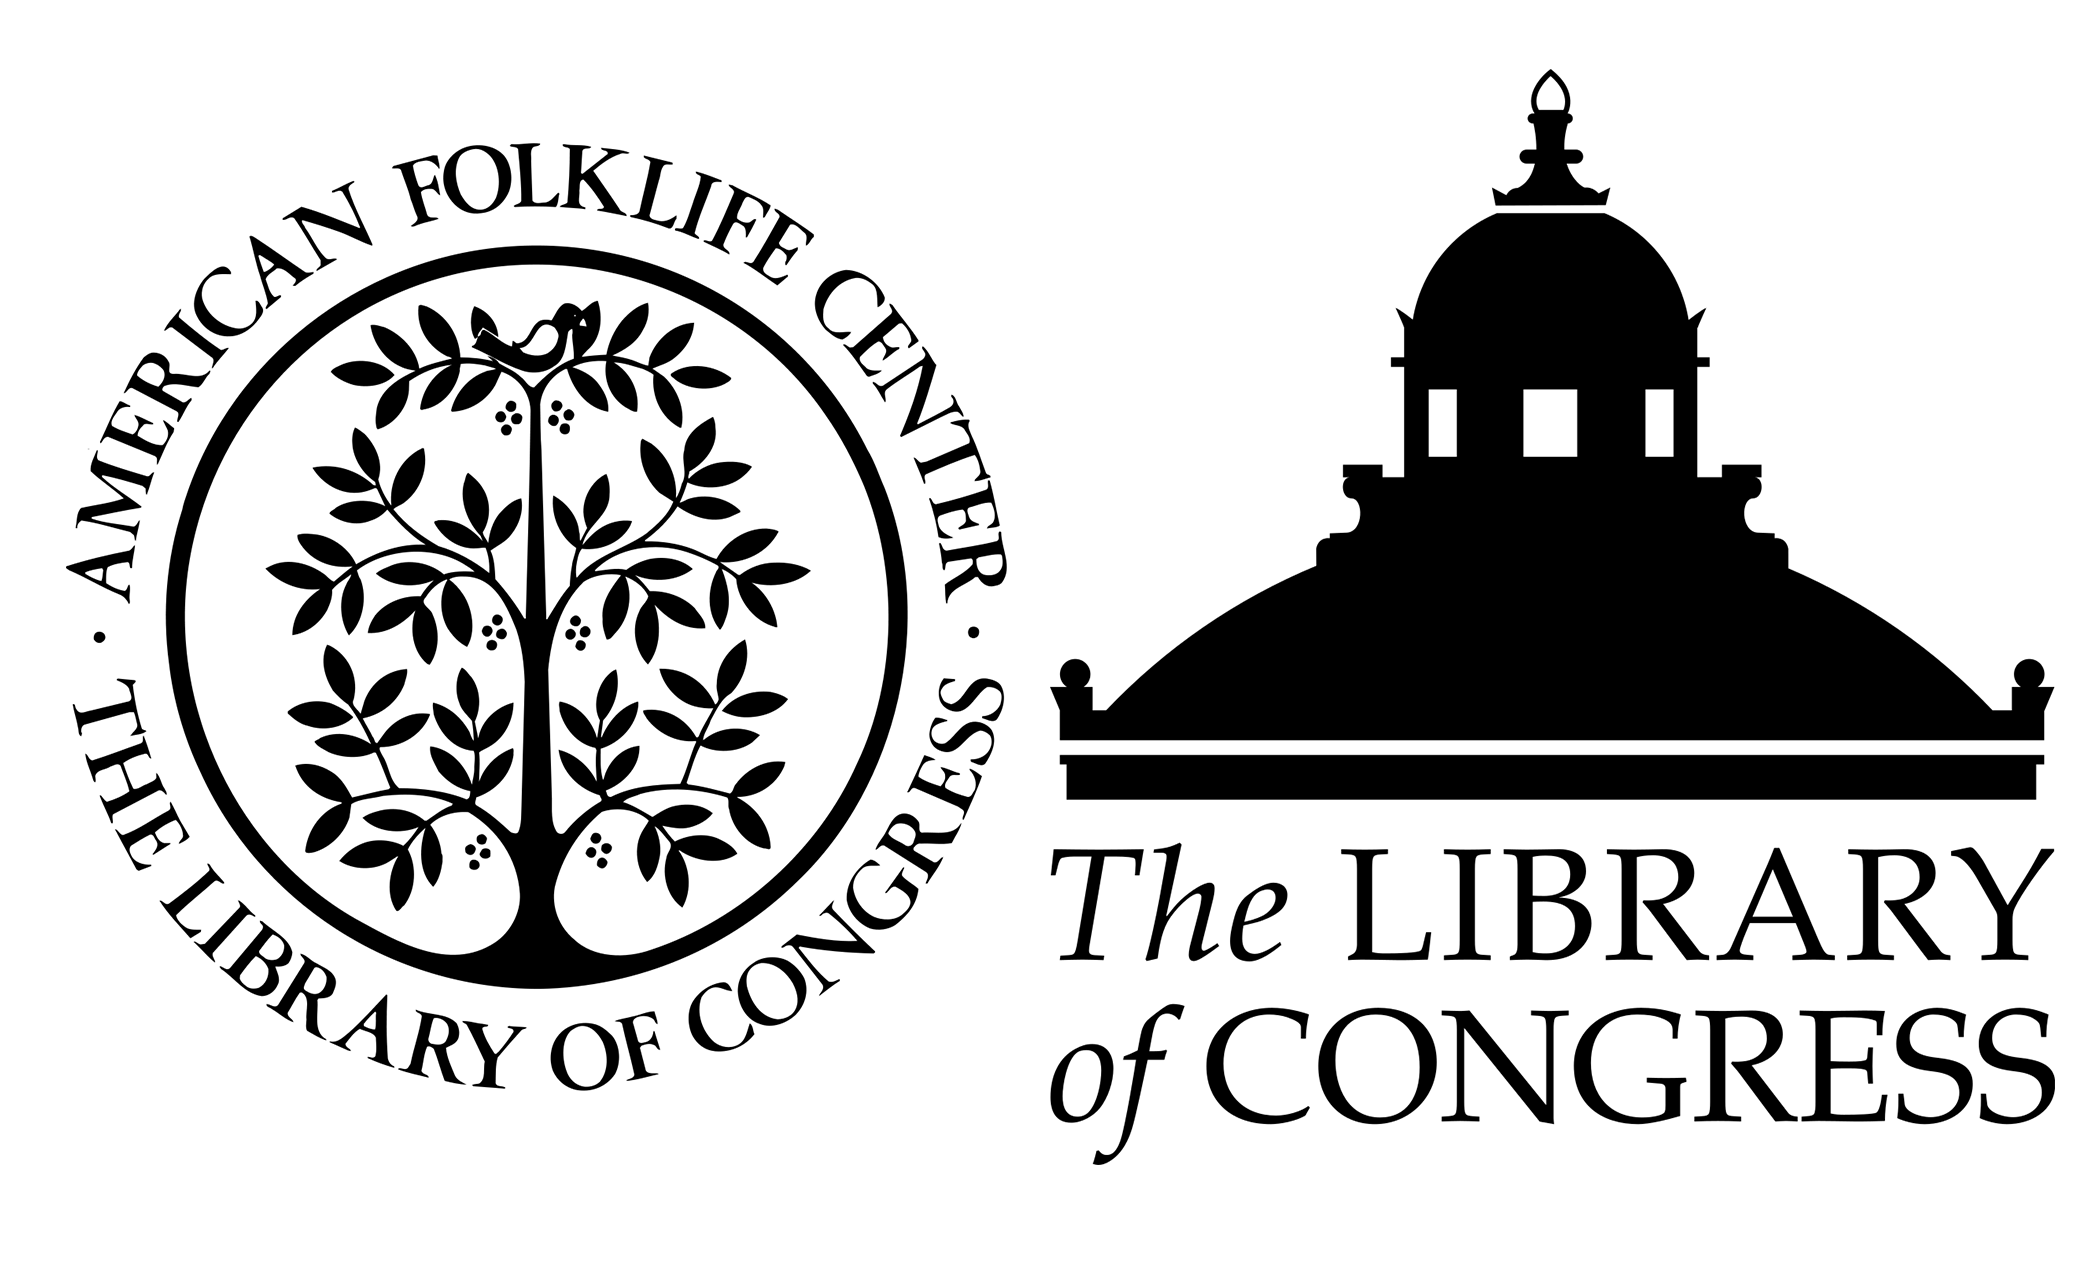 The logo for the American Folklife Center and the Library of Congress